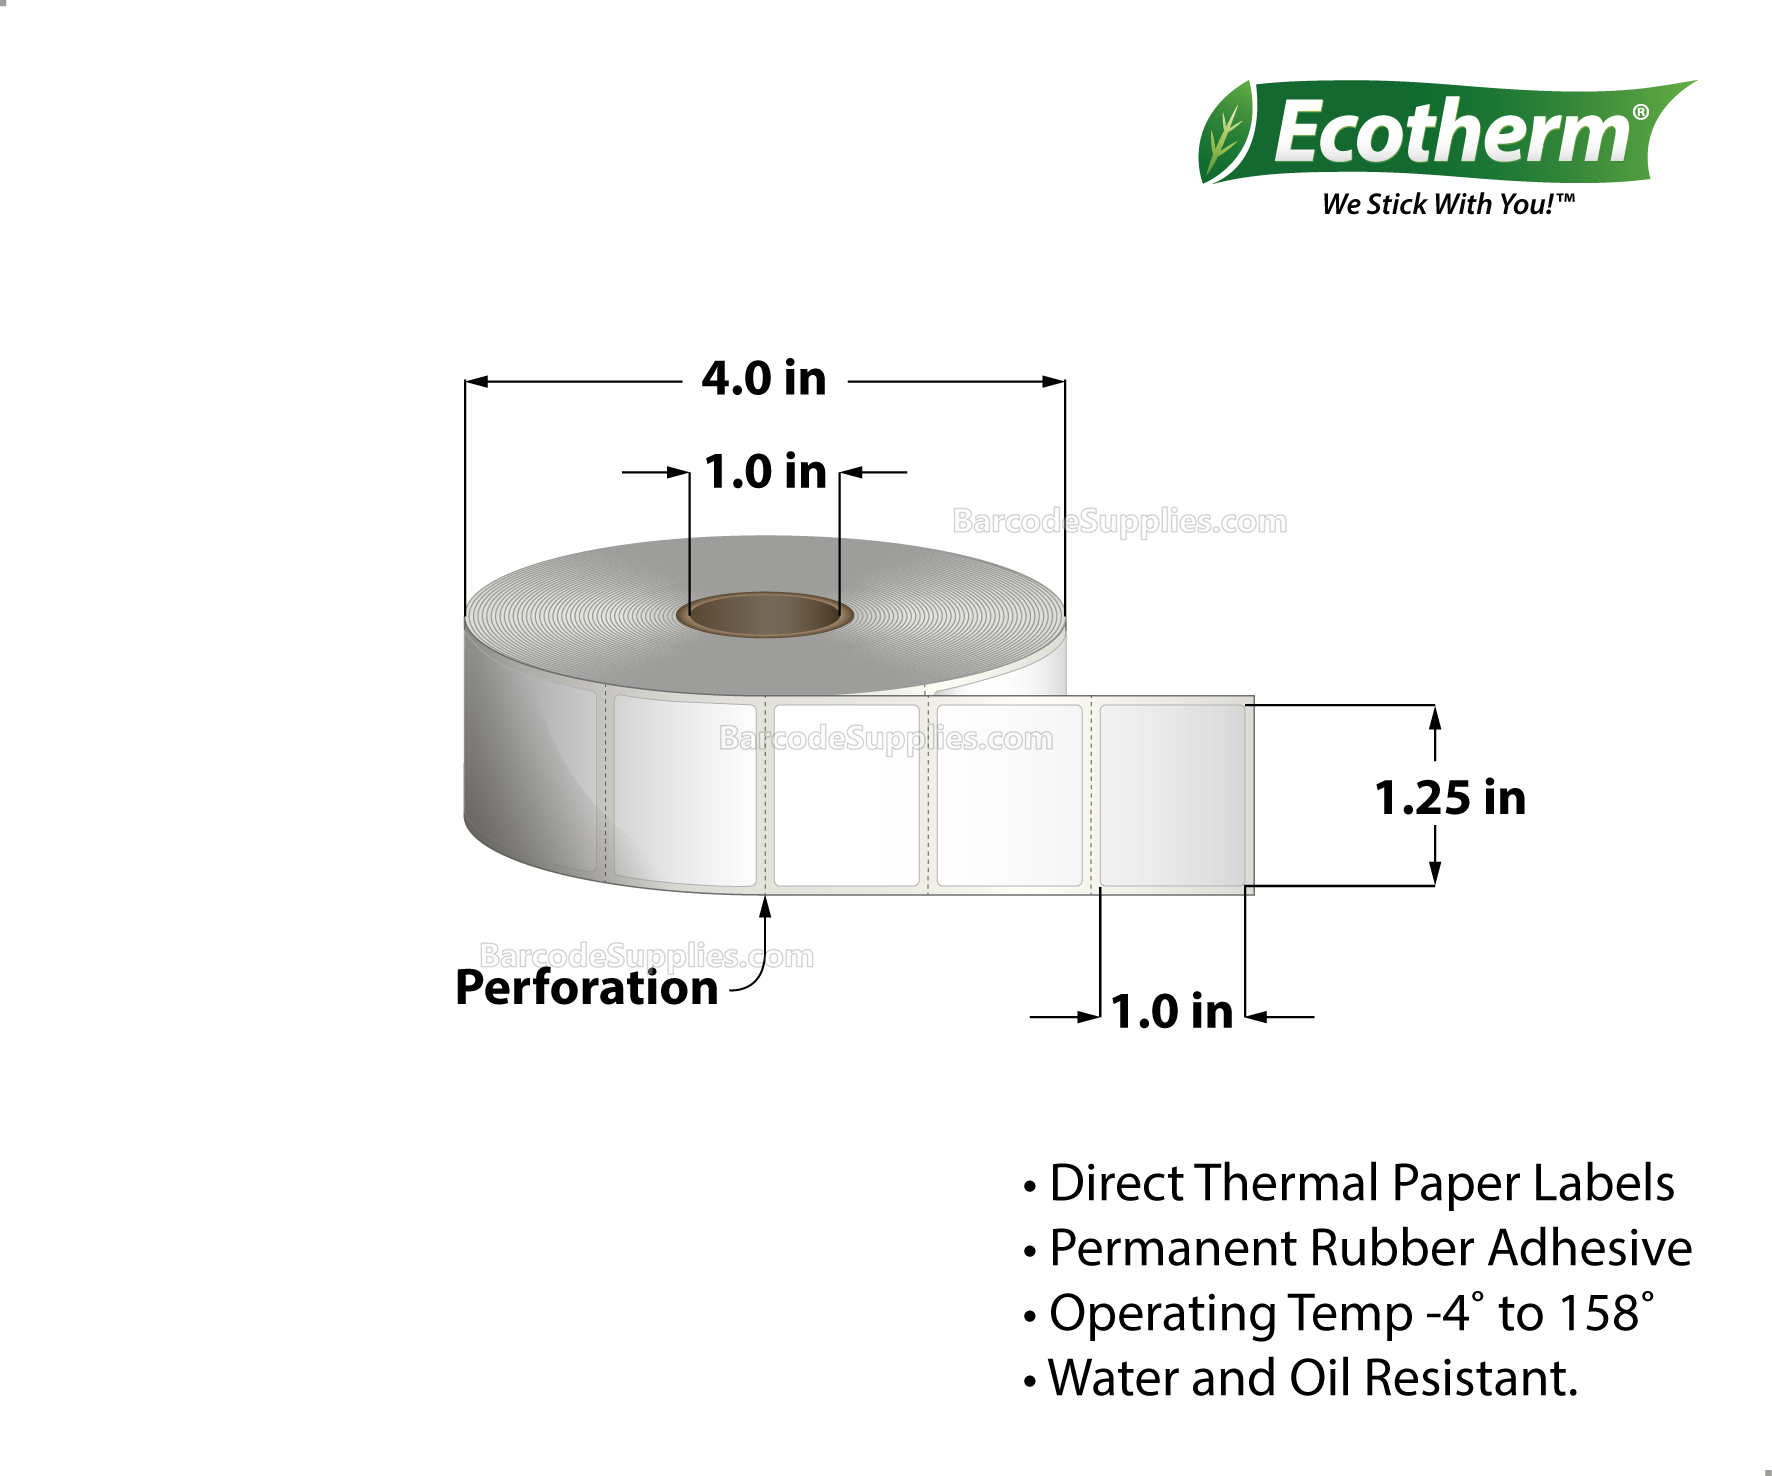 1.25x1 Direct Thermal White Labels With Rubber Adhesive - Perforated - 1380 Labels Per Roll - Carton Of 4 Rolls - 5,520 Labels Total - MPN: ECOTHERM14136-4